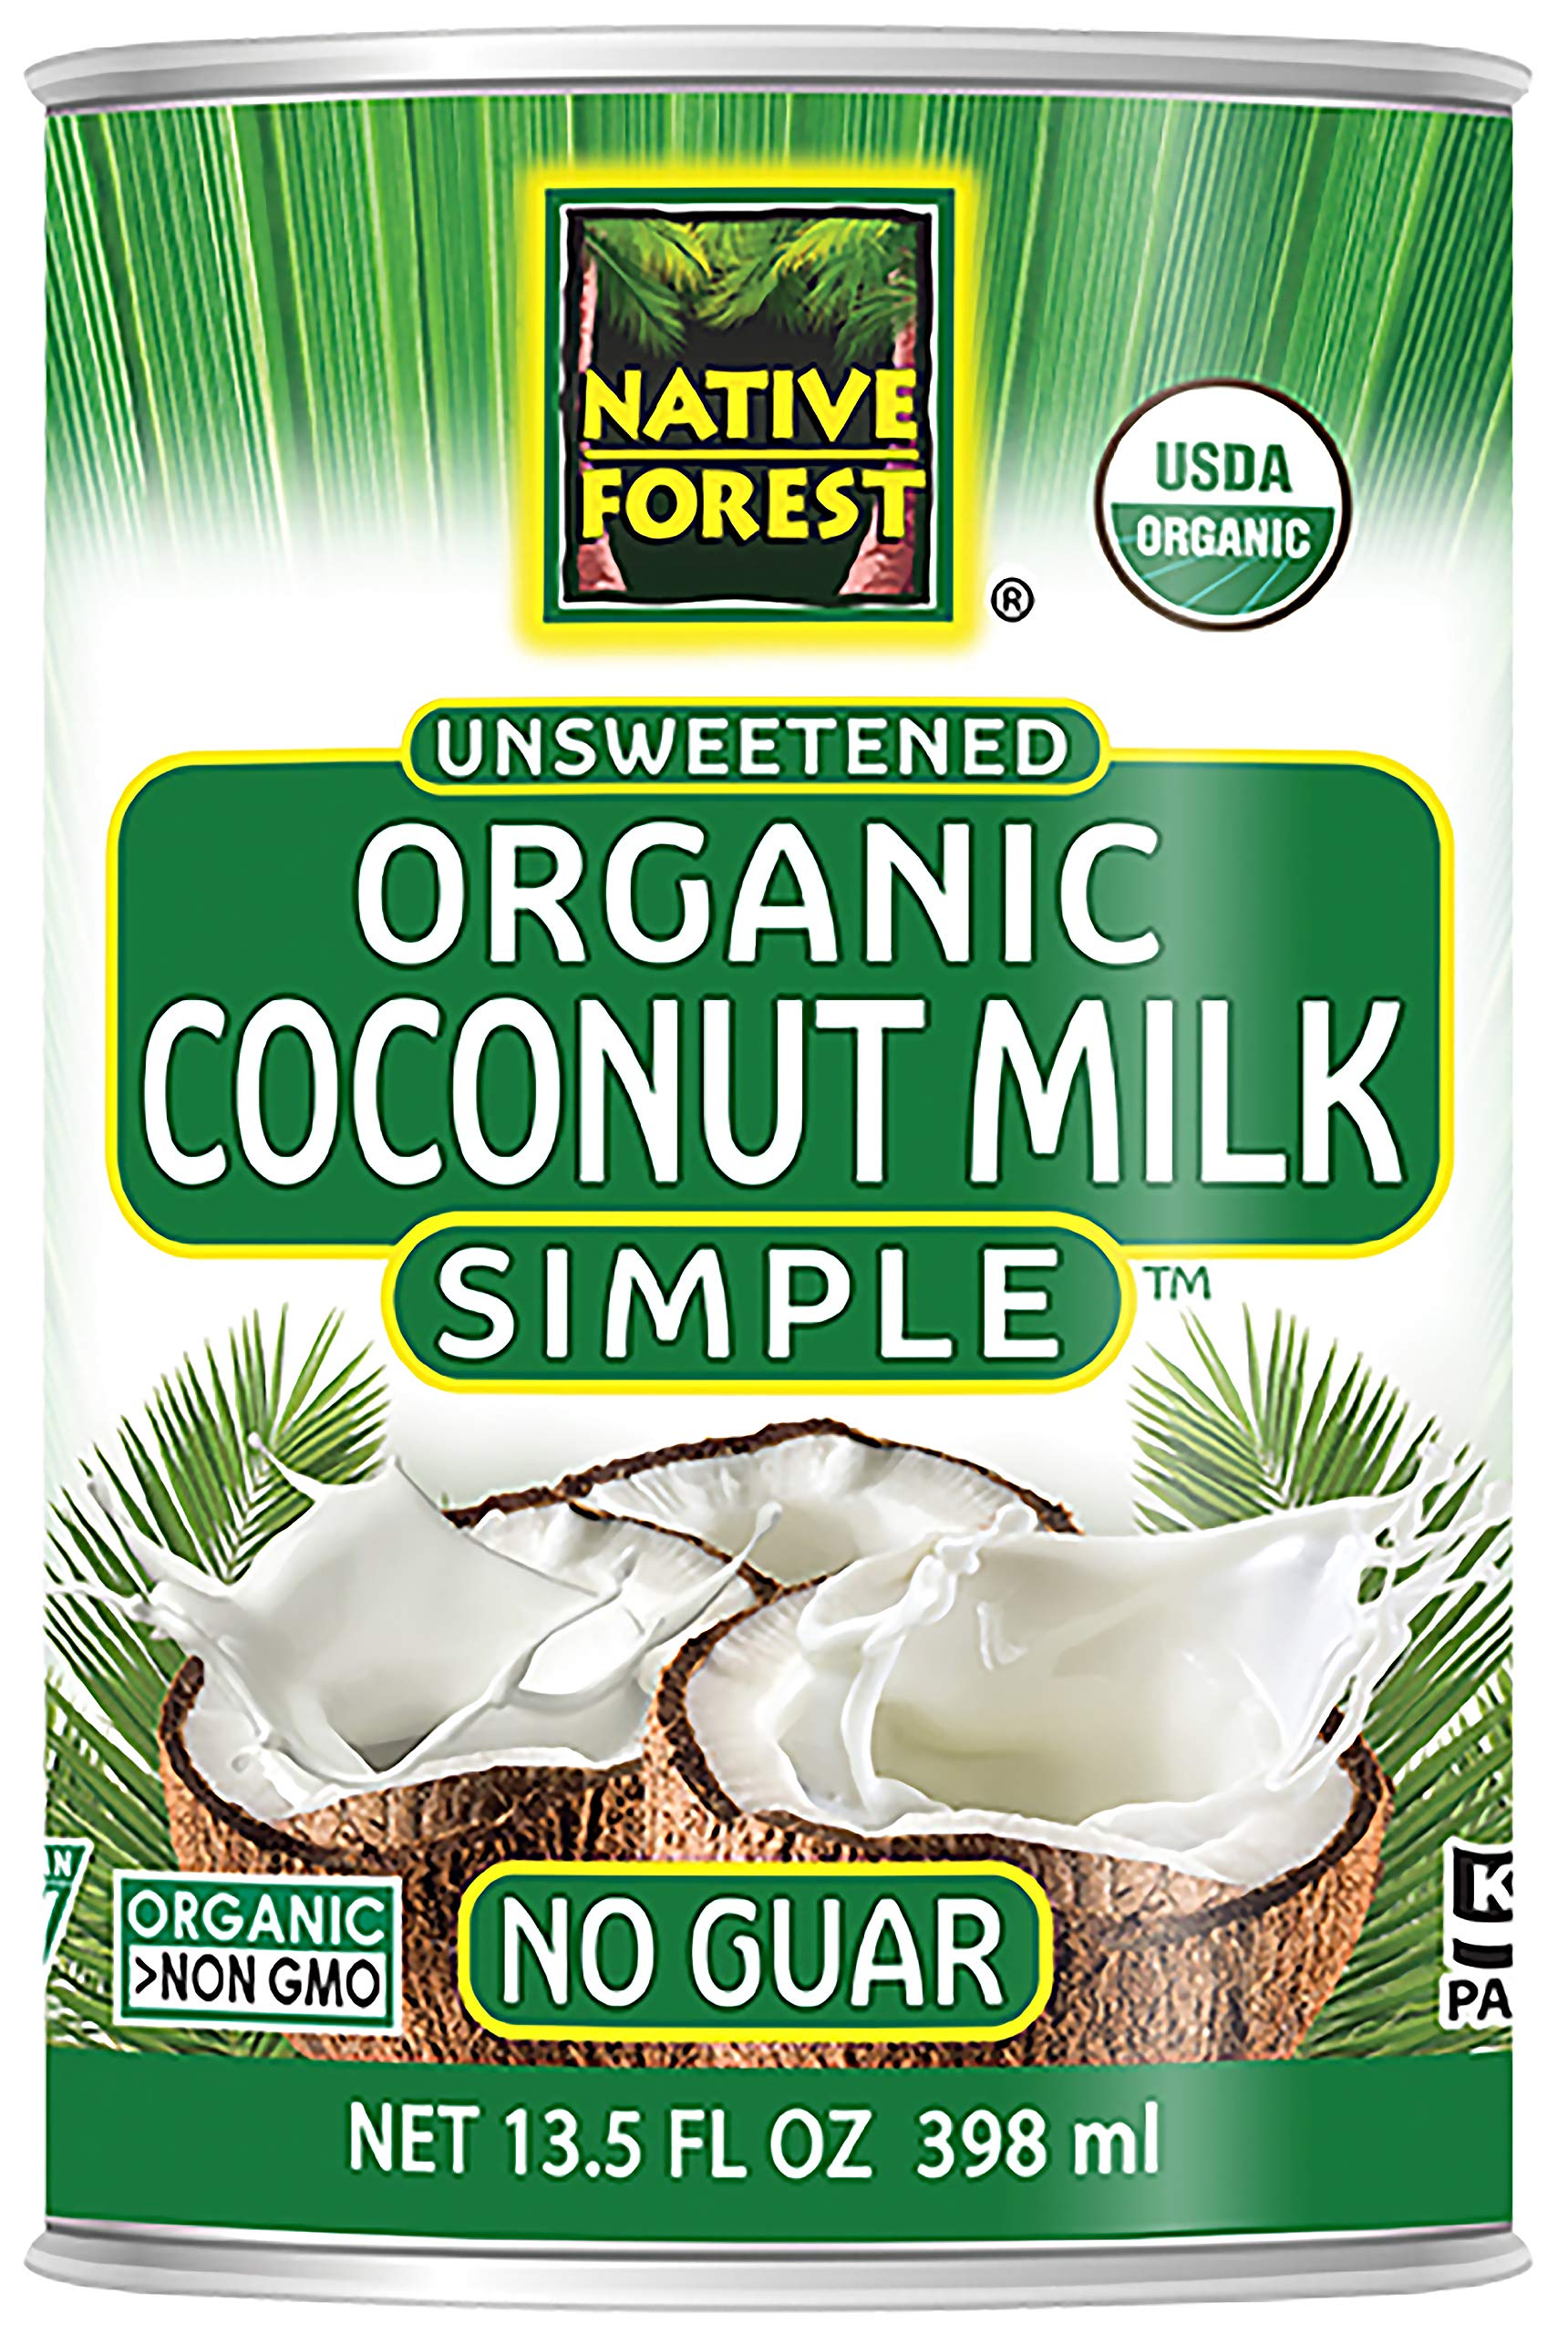 Native Forest Organic Unsweetened Coconut Milk